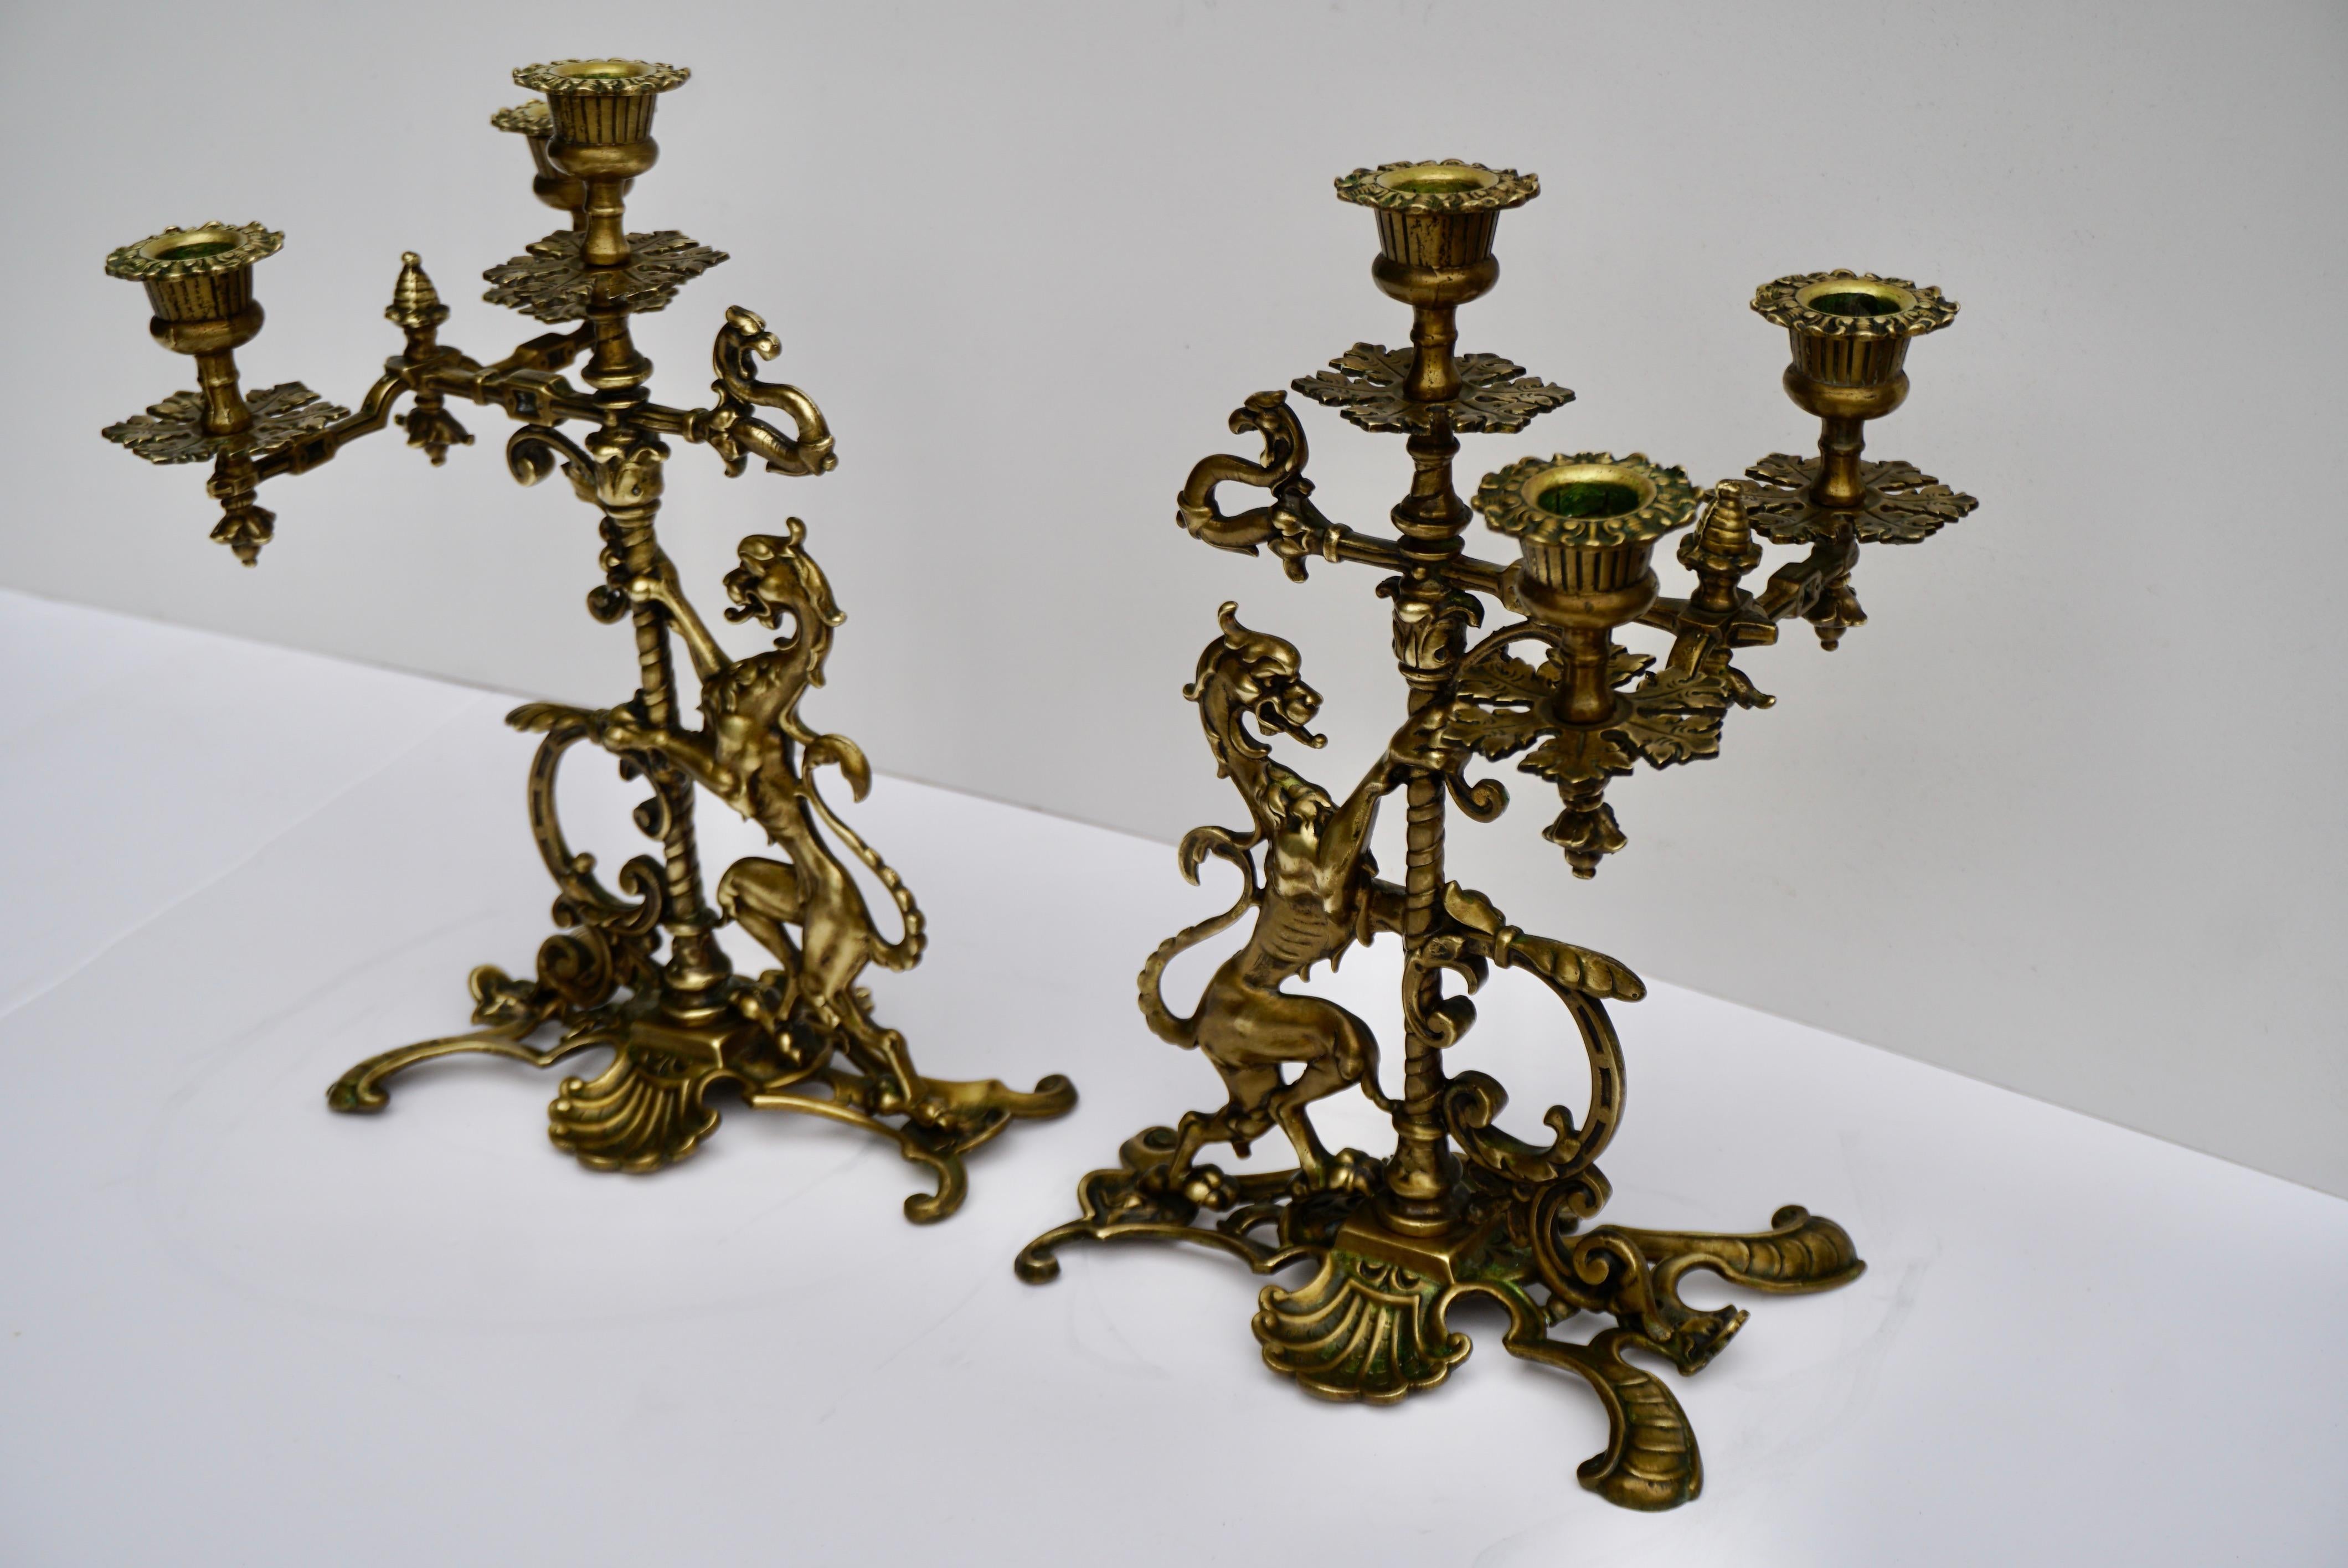 Polished Pair of Brass Figural Candelabra with Dragons